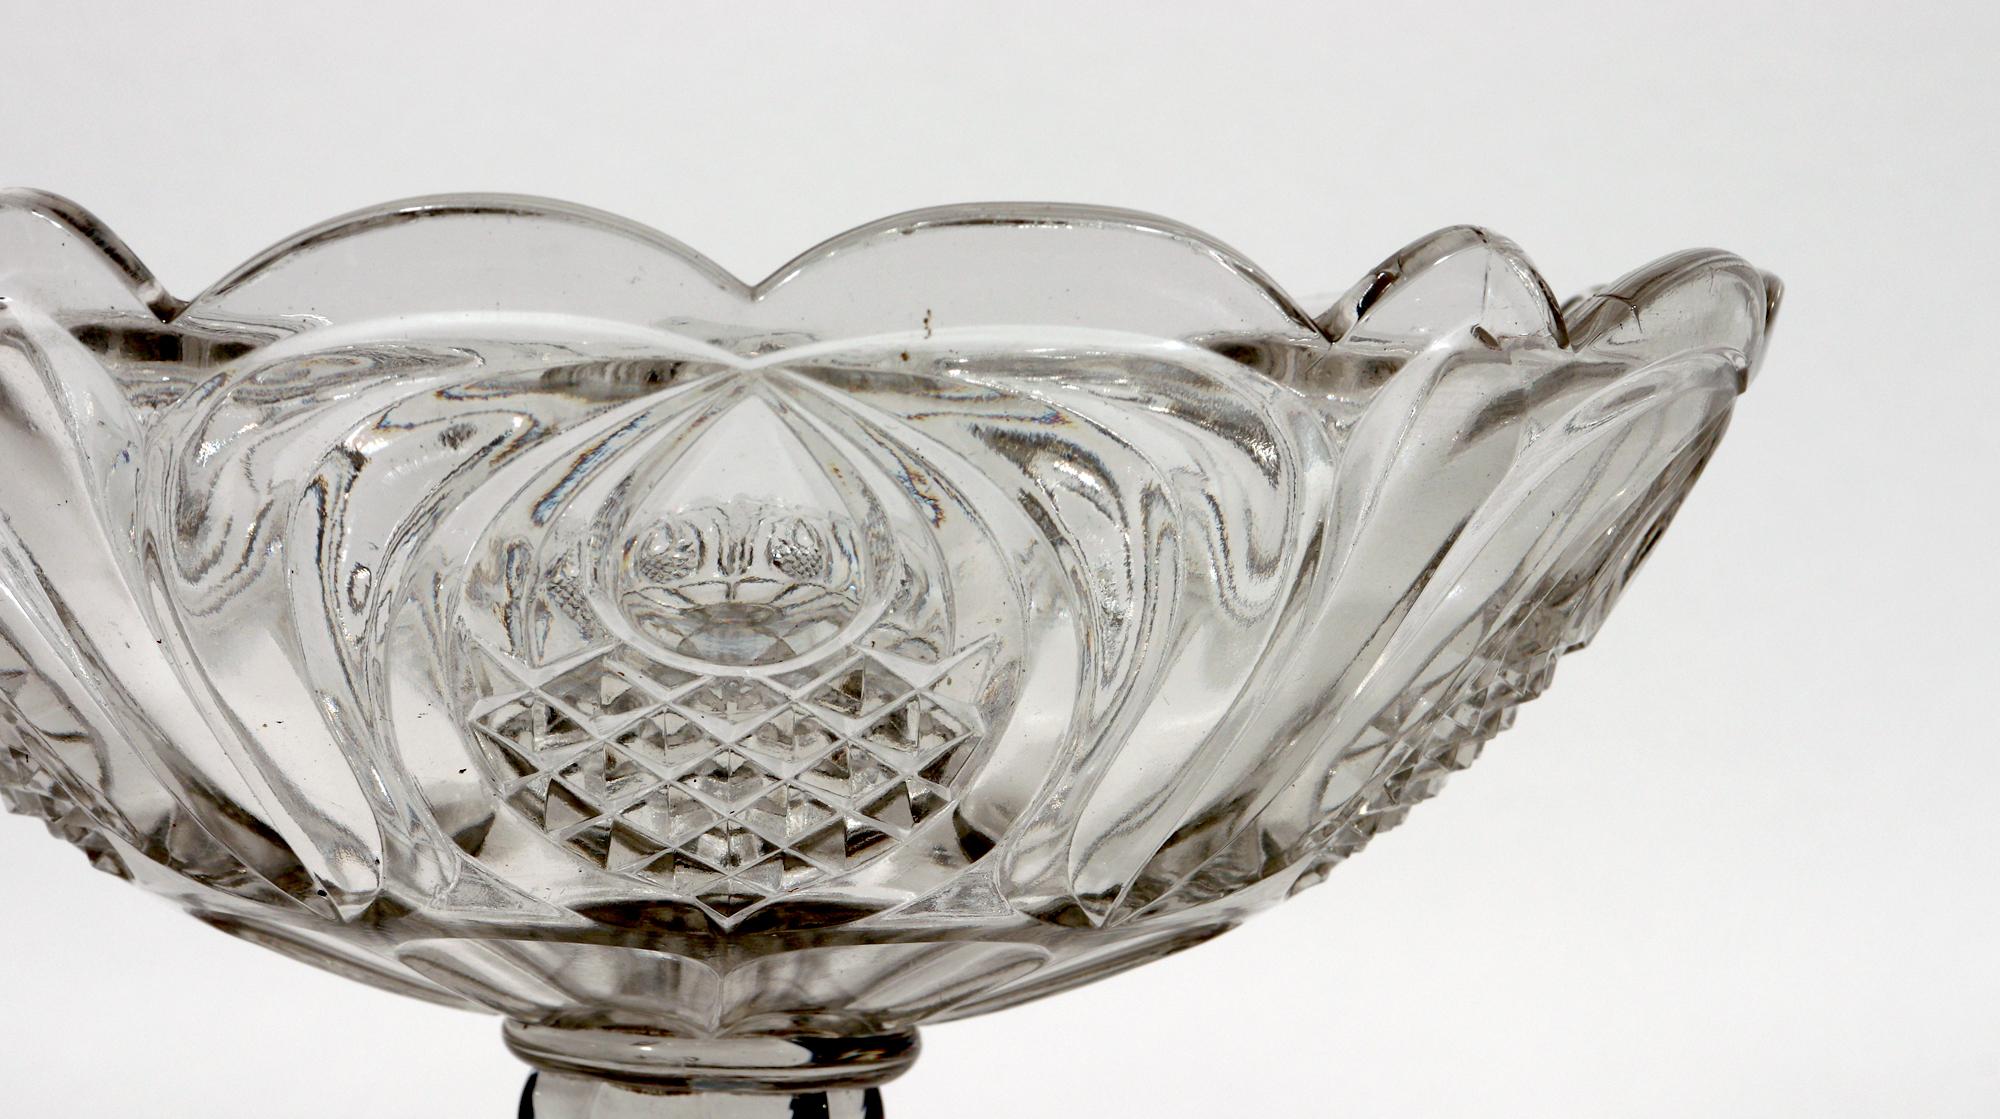 Mid-19th Century Boston & Sandwich American Pressed Glass Compote with Pineapple Pattern For Sale